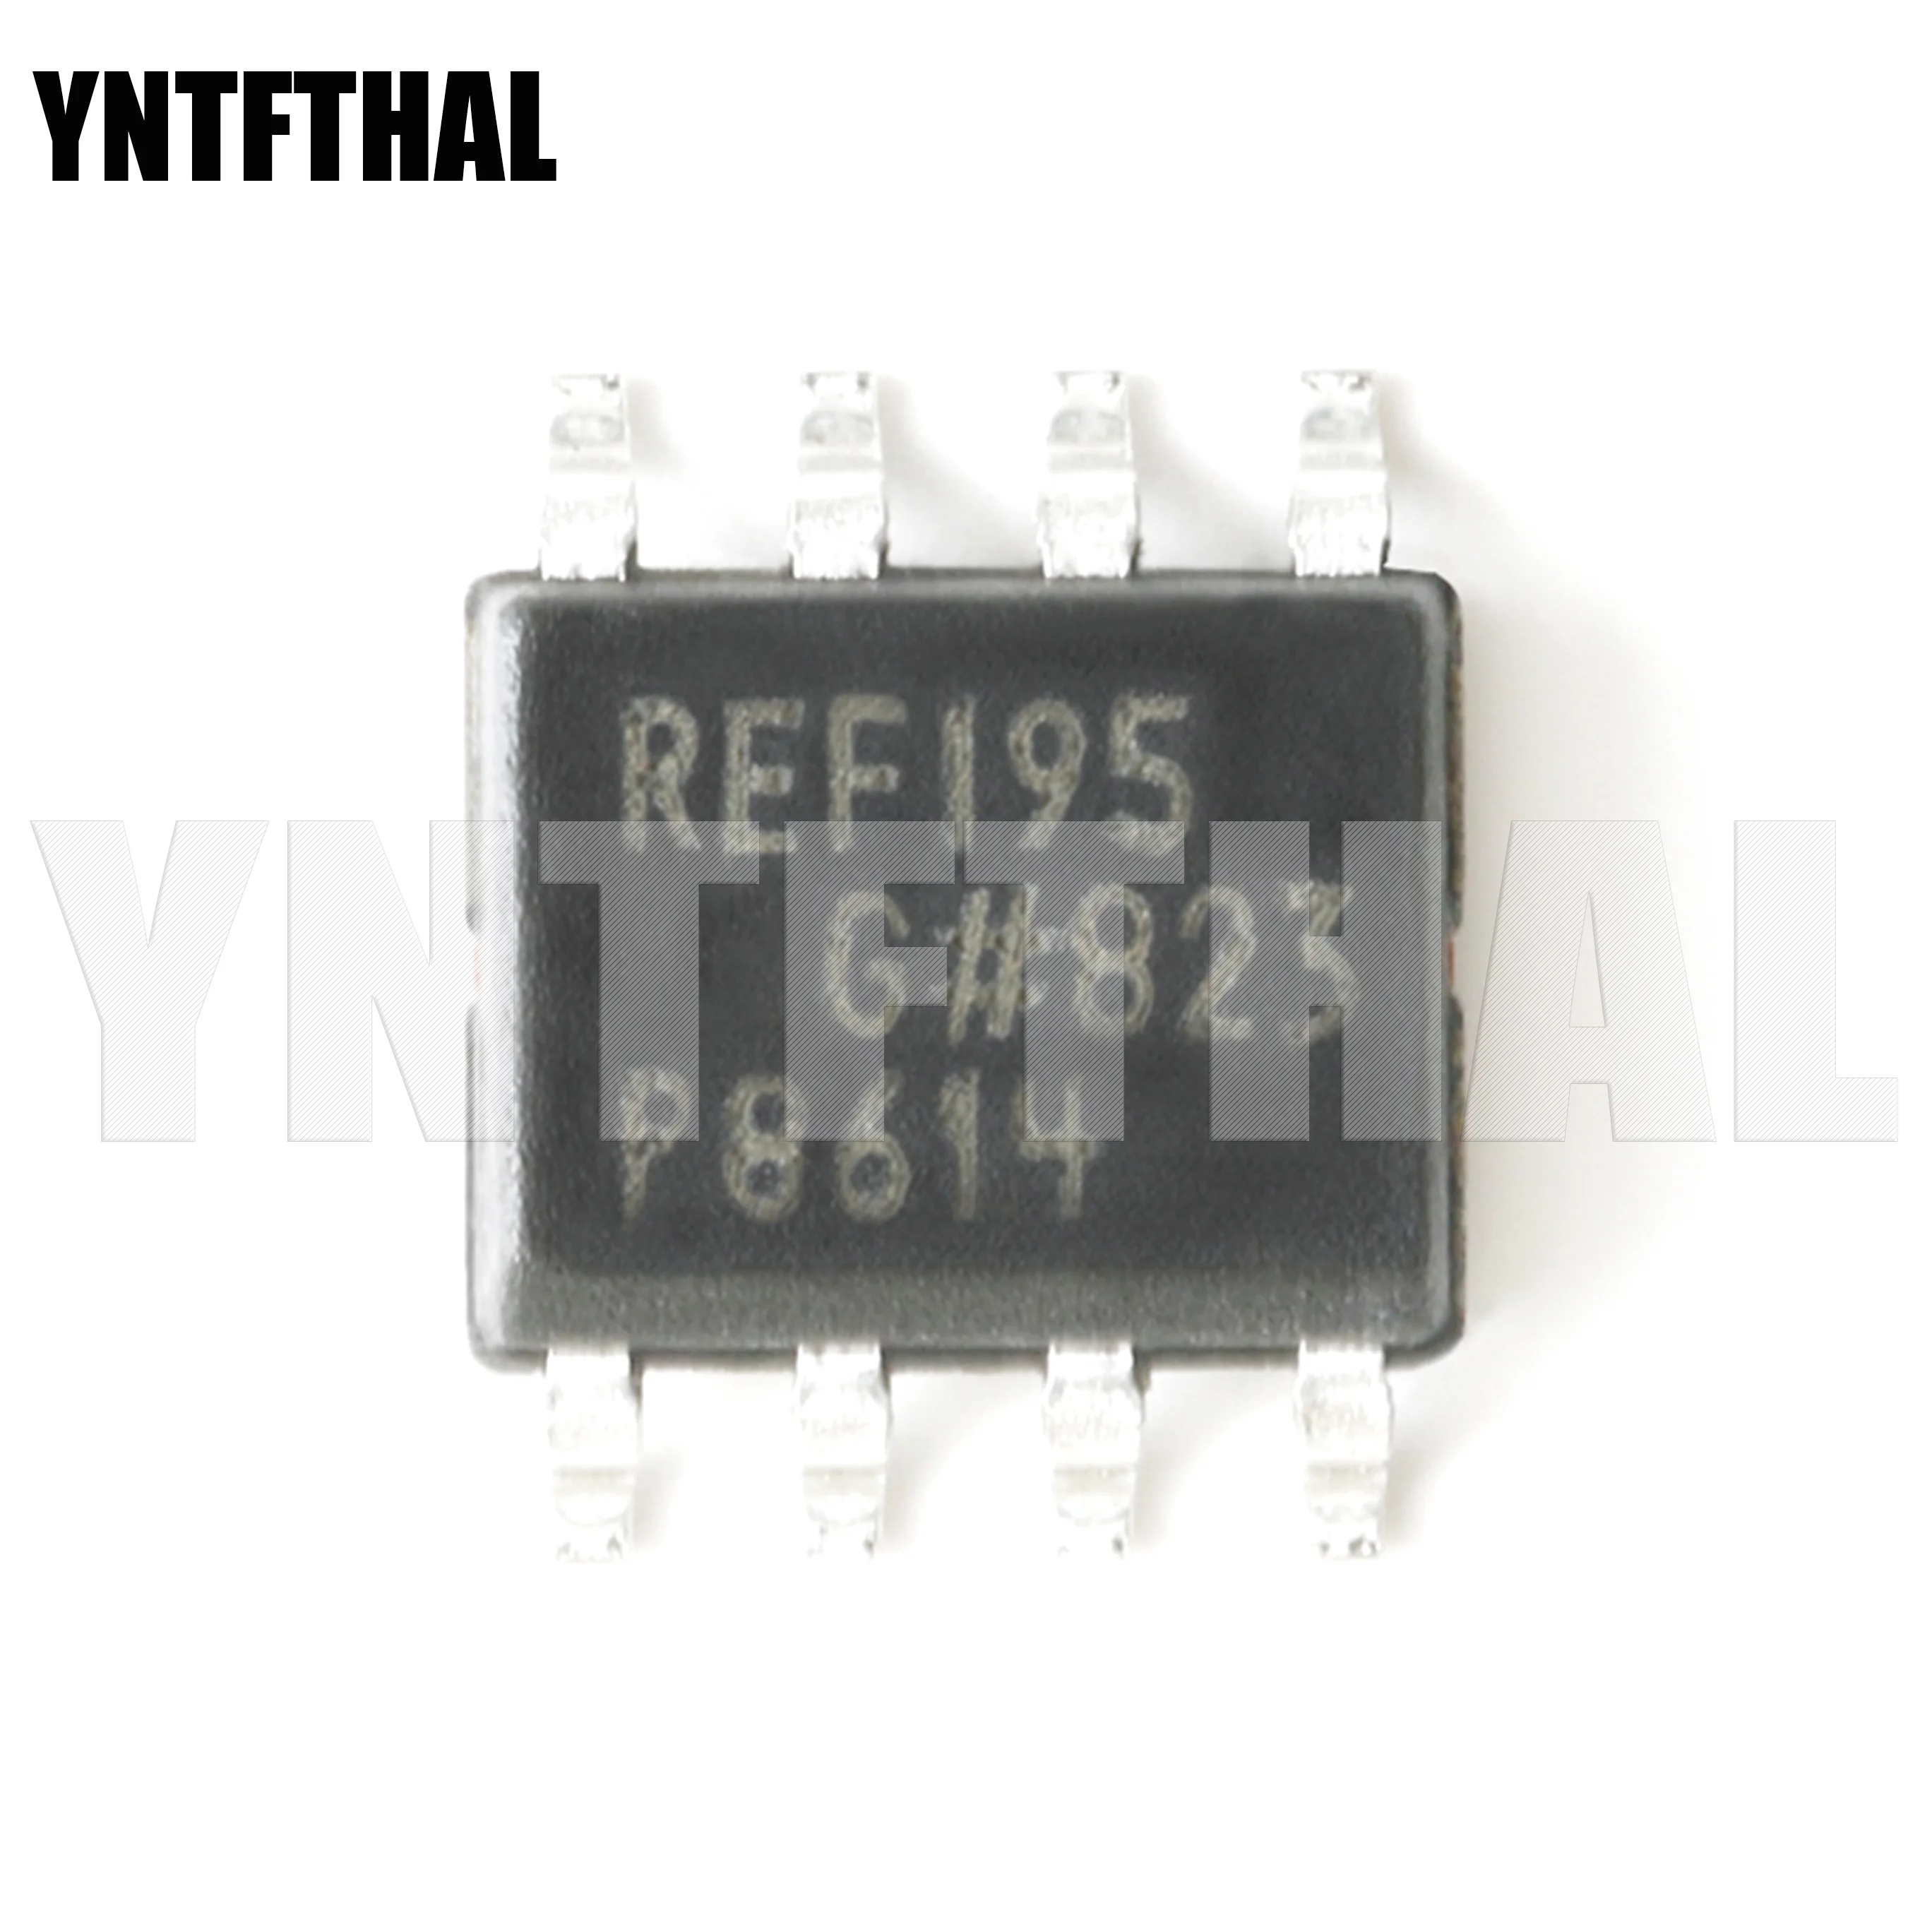 

10pcs New 100% Tested REF195GSZ-REEL7 SOIC-8 5.0 V Precision Low Voltage Voltage Reference Chip